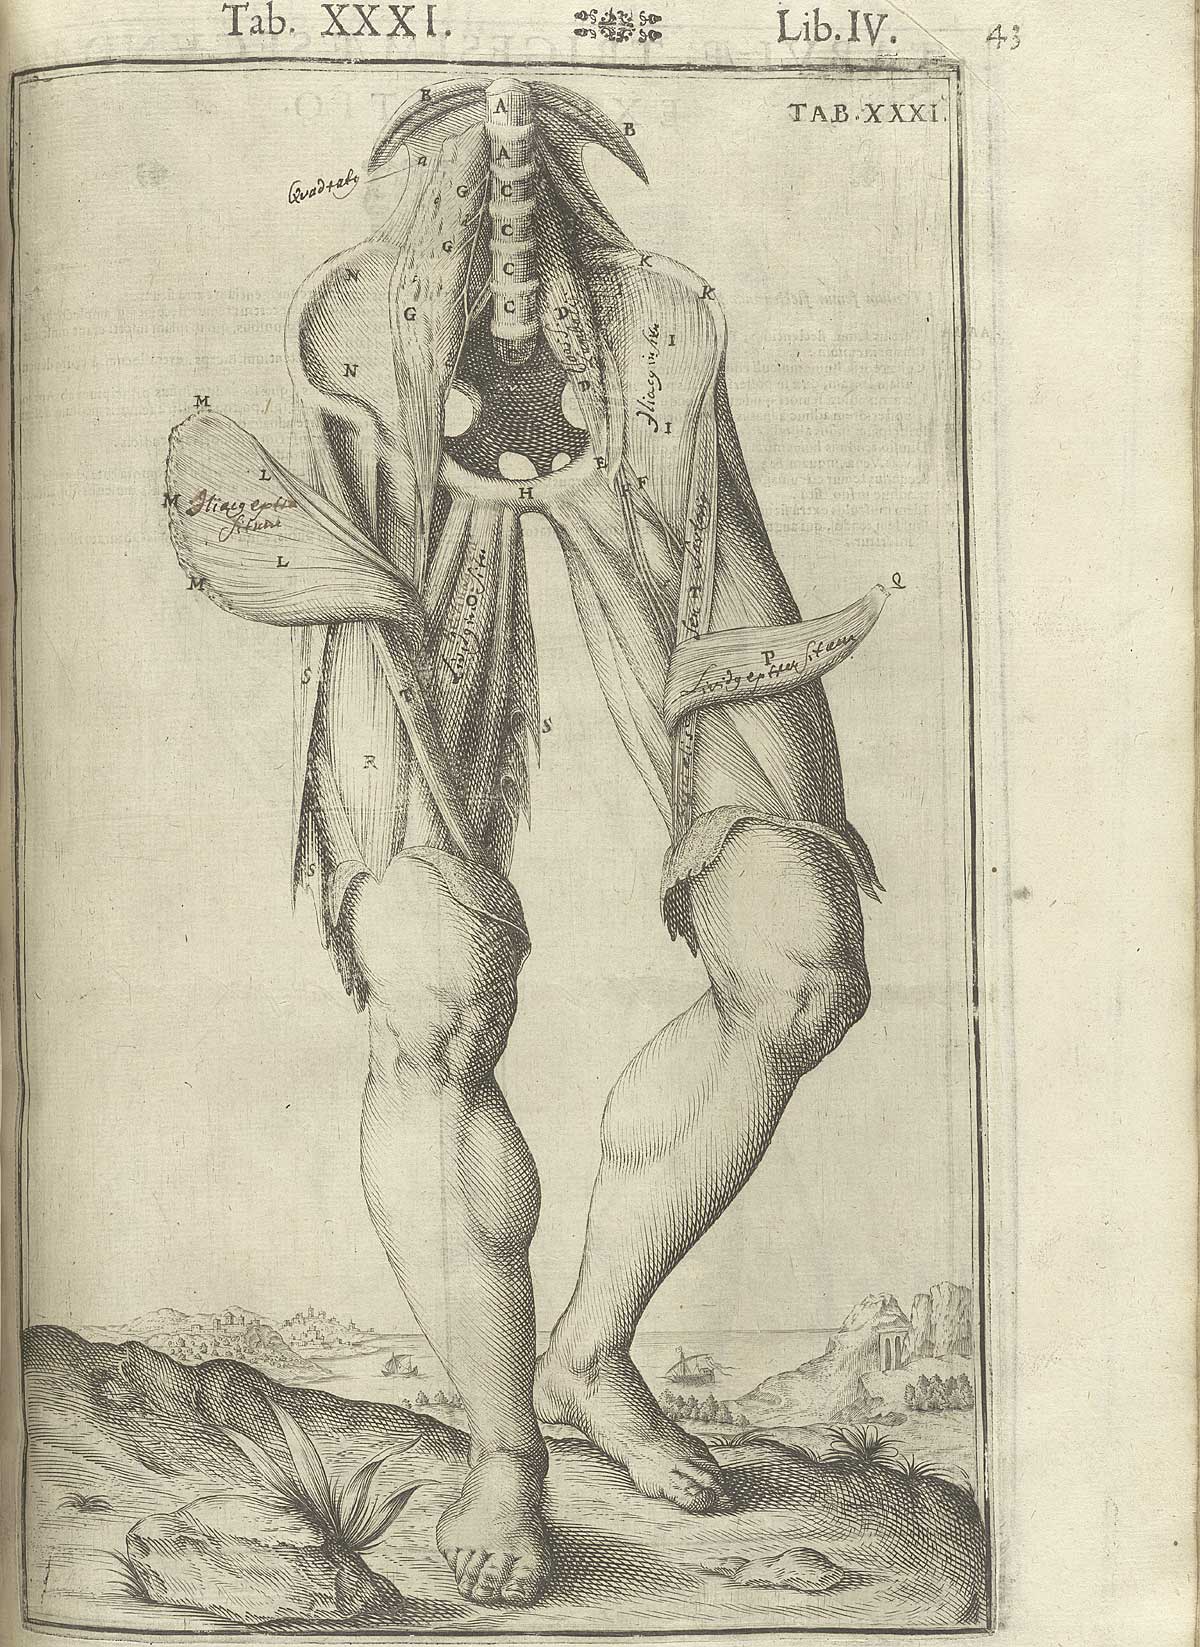 Engraving showing the lower spine and upper leg muscles of a disembodied subject “facing” toward the viewer in a pastoral setting; the quadriceps femoris and adductor muscles are especially featured, flapping away from the legs; from Adriaan van de Spiegel and Giulio Cassieri’s De humani corporis fabrica libri decem, Venice, 1627, NLM call no. WZ 250 S755dh 1627.